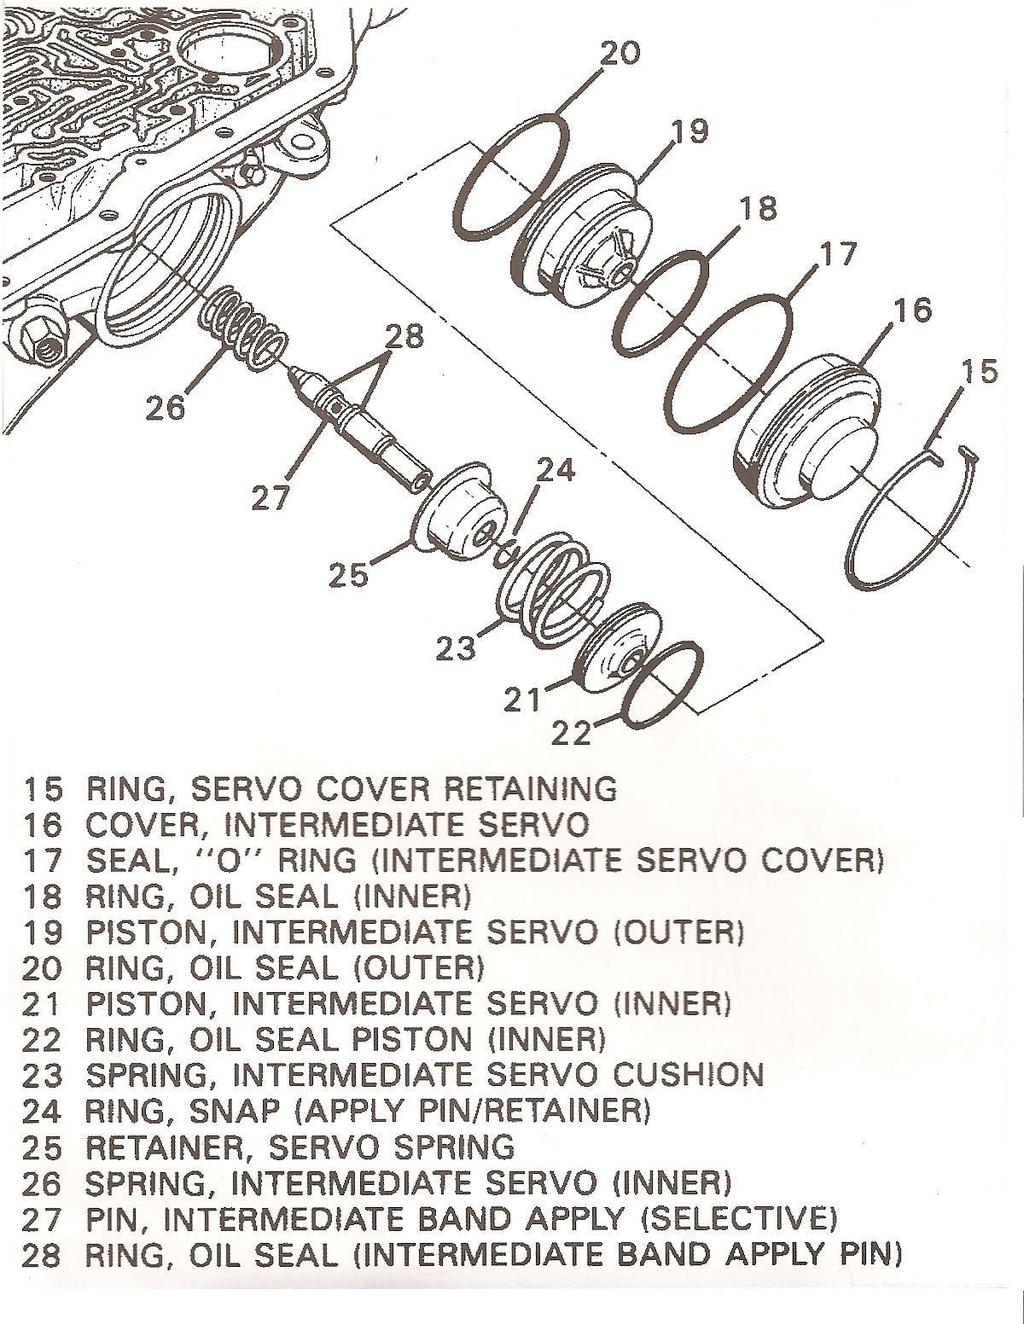 Locate the intermediate servo assembly on the passenger side of the transmission case. Using the figure as a guide, remove the servo cover retaining ring (15) and remove the servo assembly.